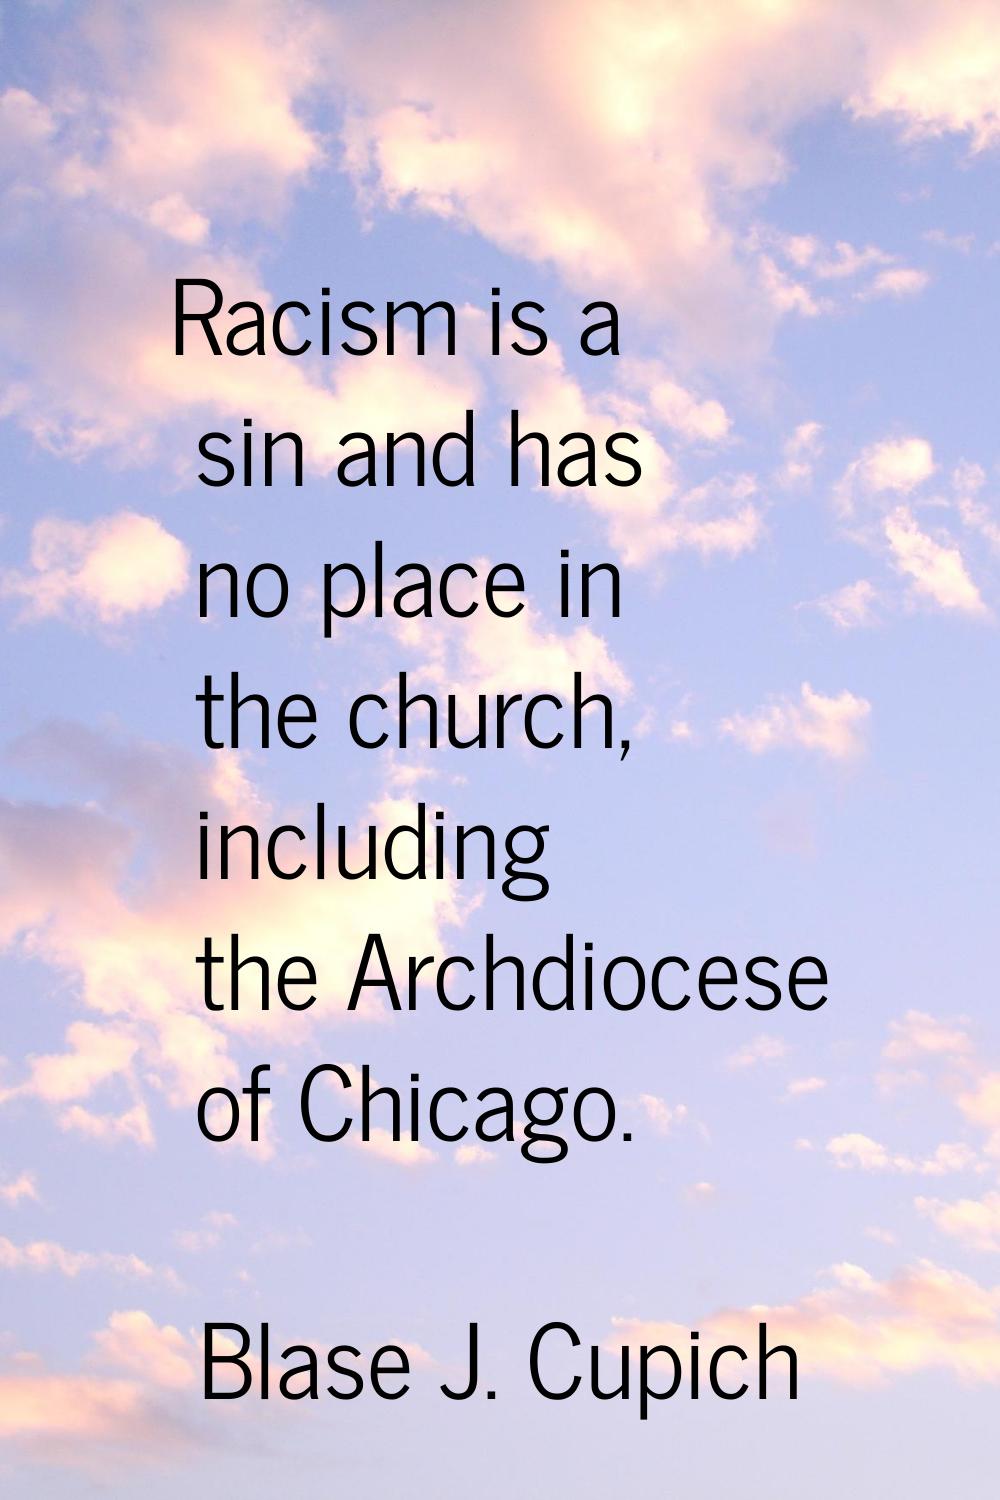 Racism is a sin and has no place in the church, including the Archdiocese of Chicago.